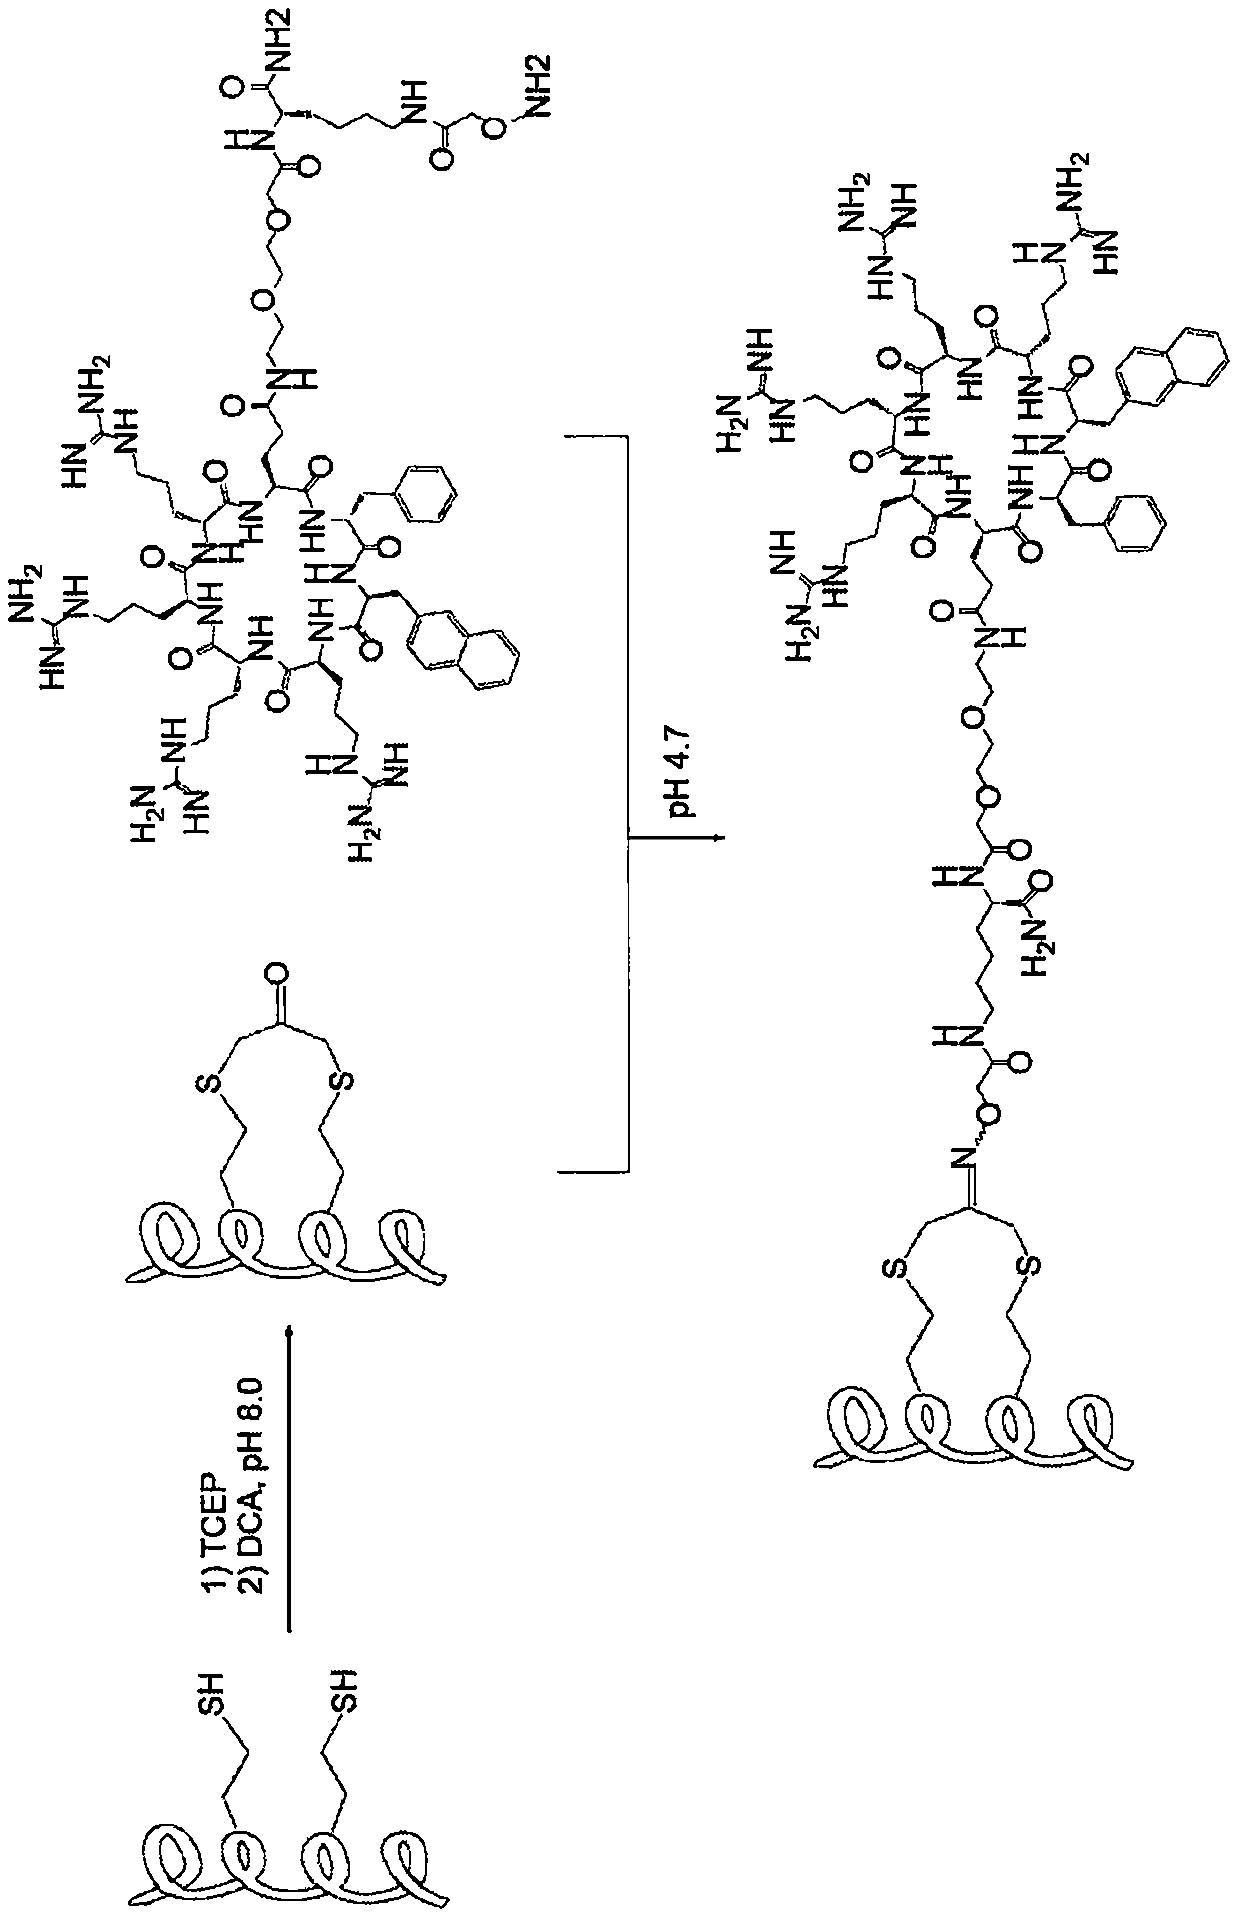 Polypeptide conjugates for intracellular delivery of stapled peptides